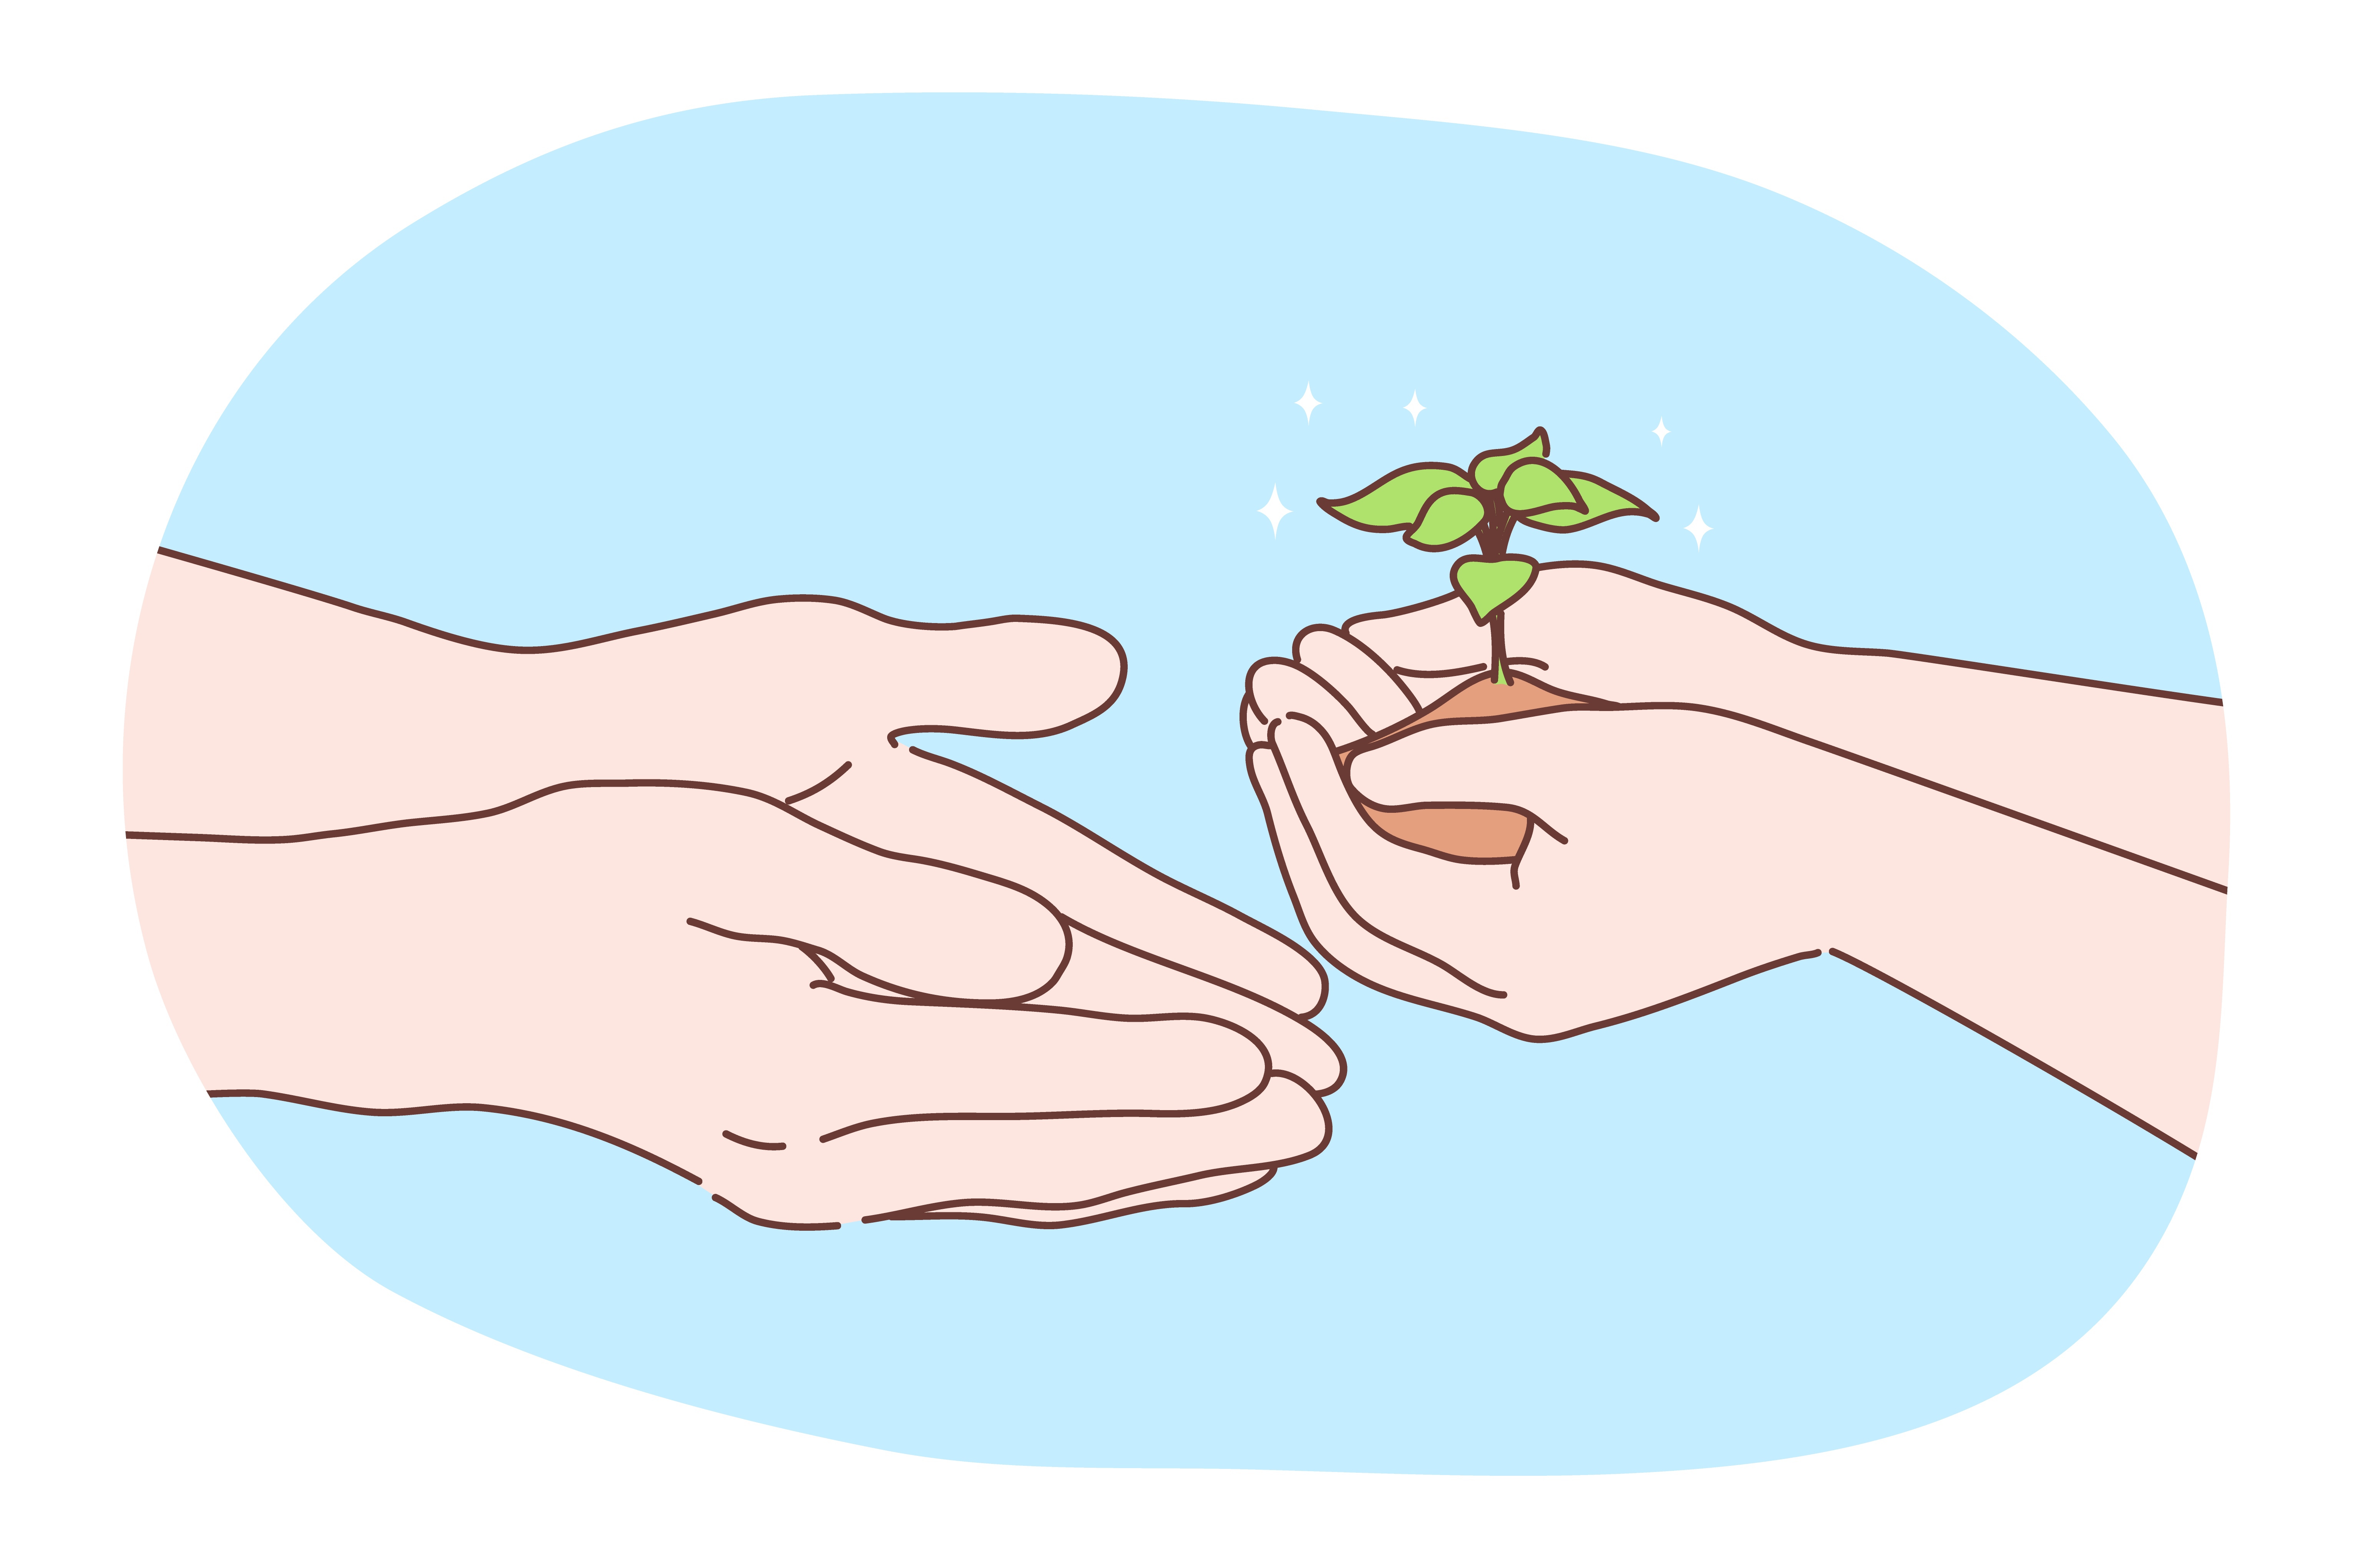 Ecology, environment, biology charity, earth day concept. Human character hands holding and passing sapling or plant. Nature protection and bilogical enviromental friendly care or new life symbol.. Ecology, environment, charity, earth day concept